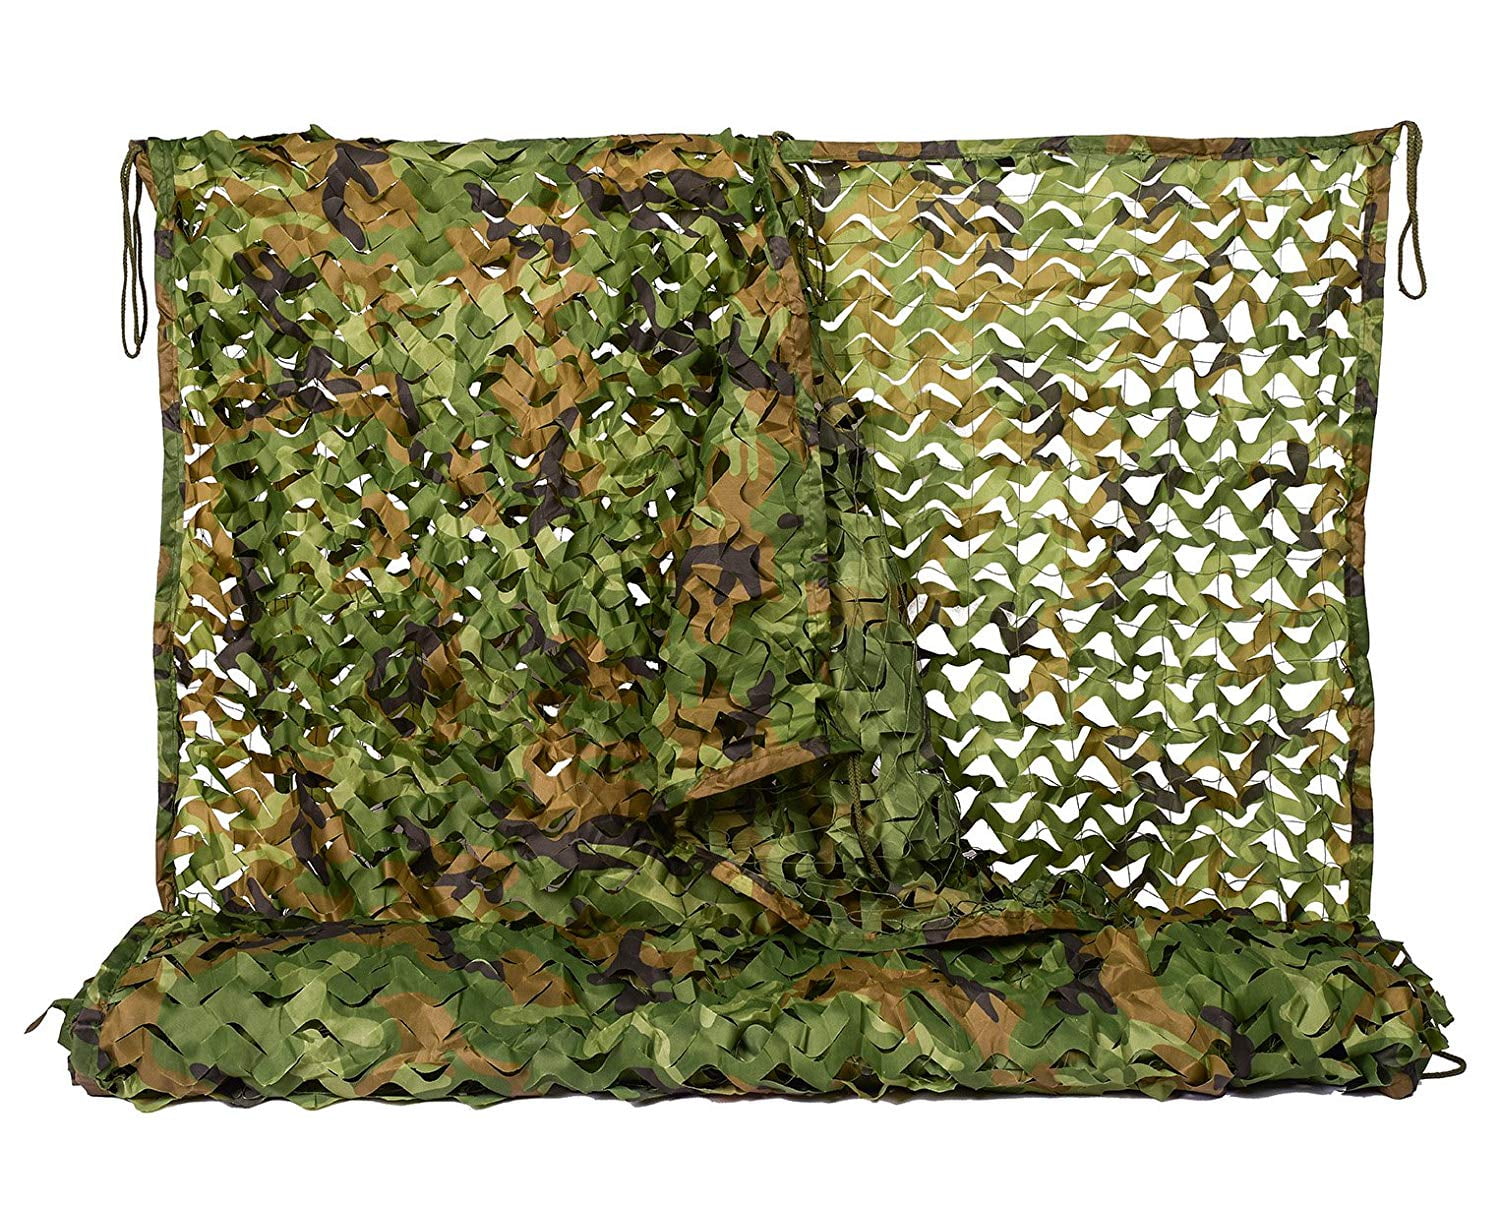 Camo Netting Camouflage Net Blinds Camping Shooting Hunting Military Decoration 